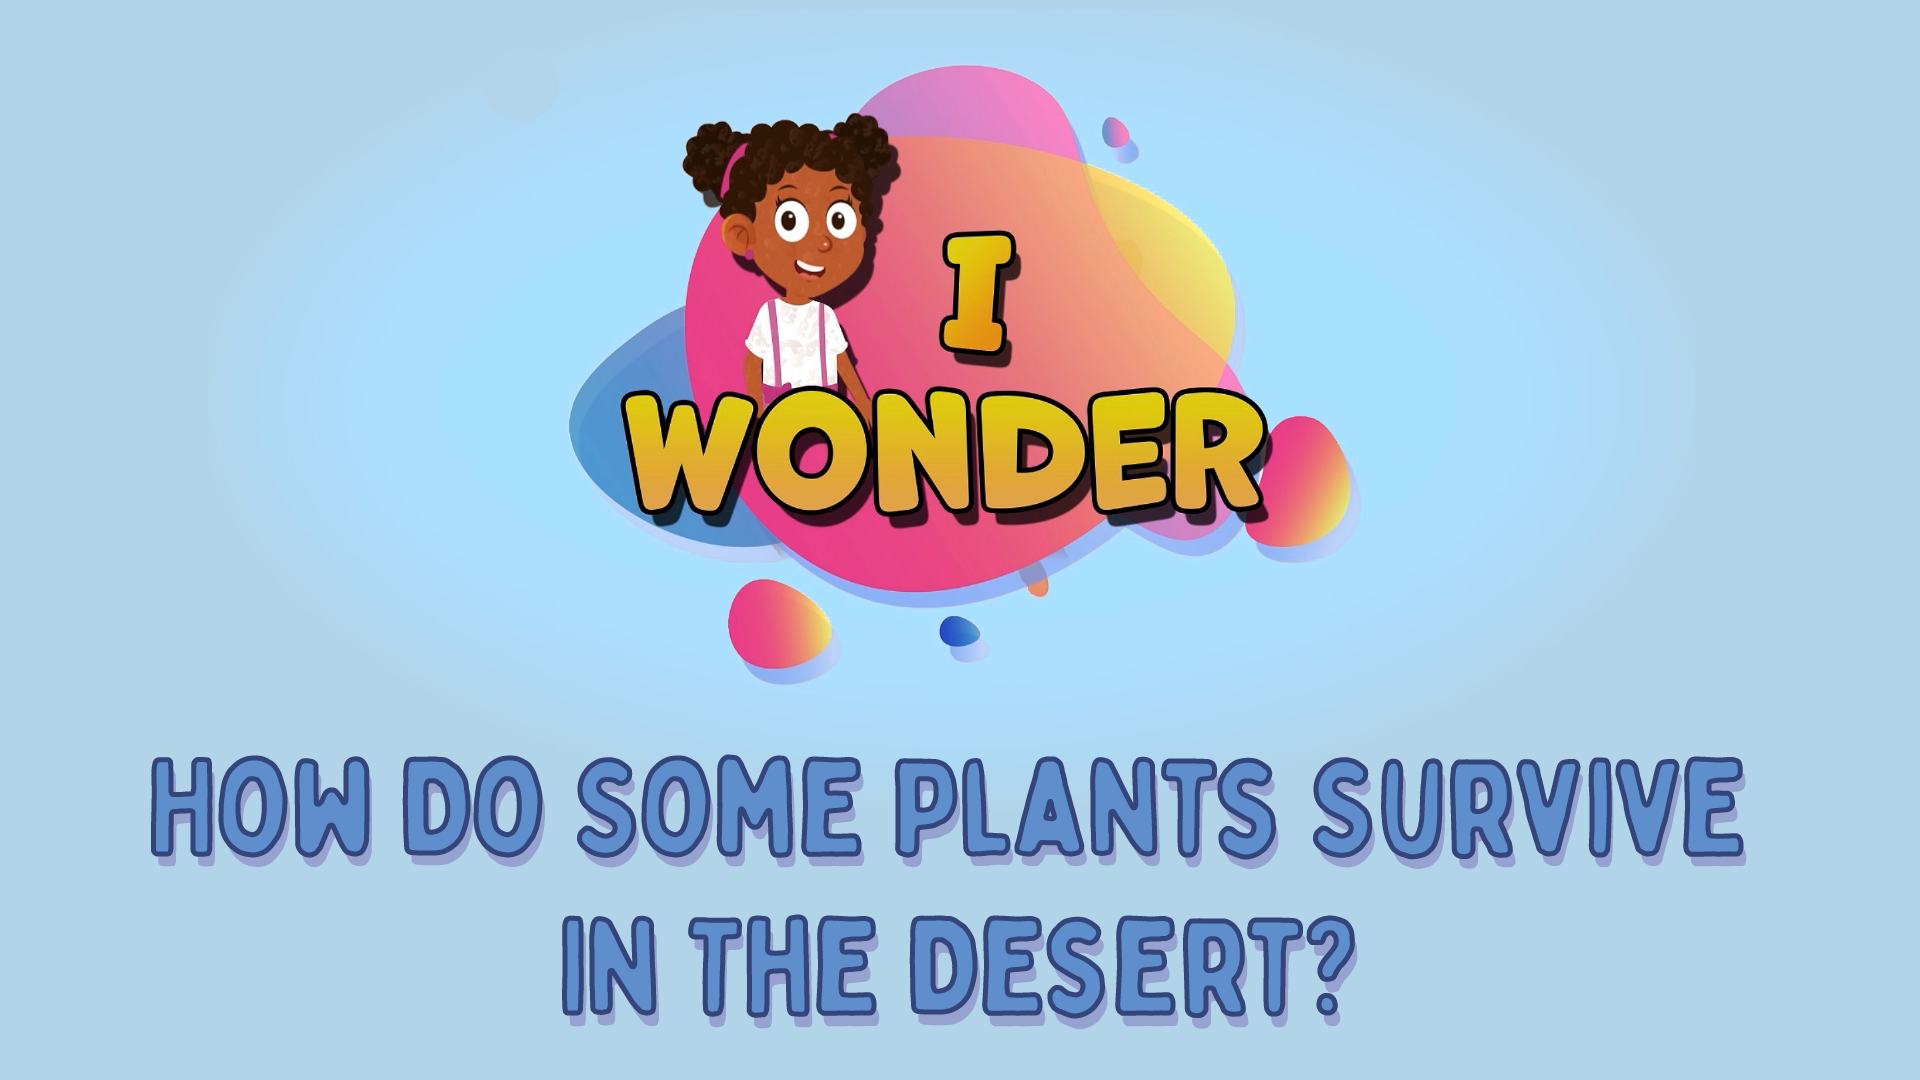 How Do Some Plants Survive In The Desert?